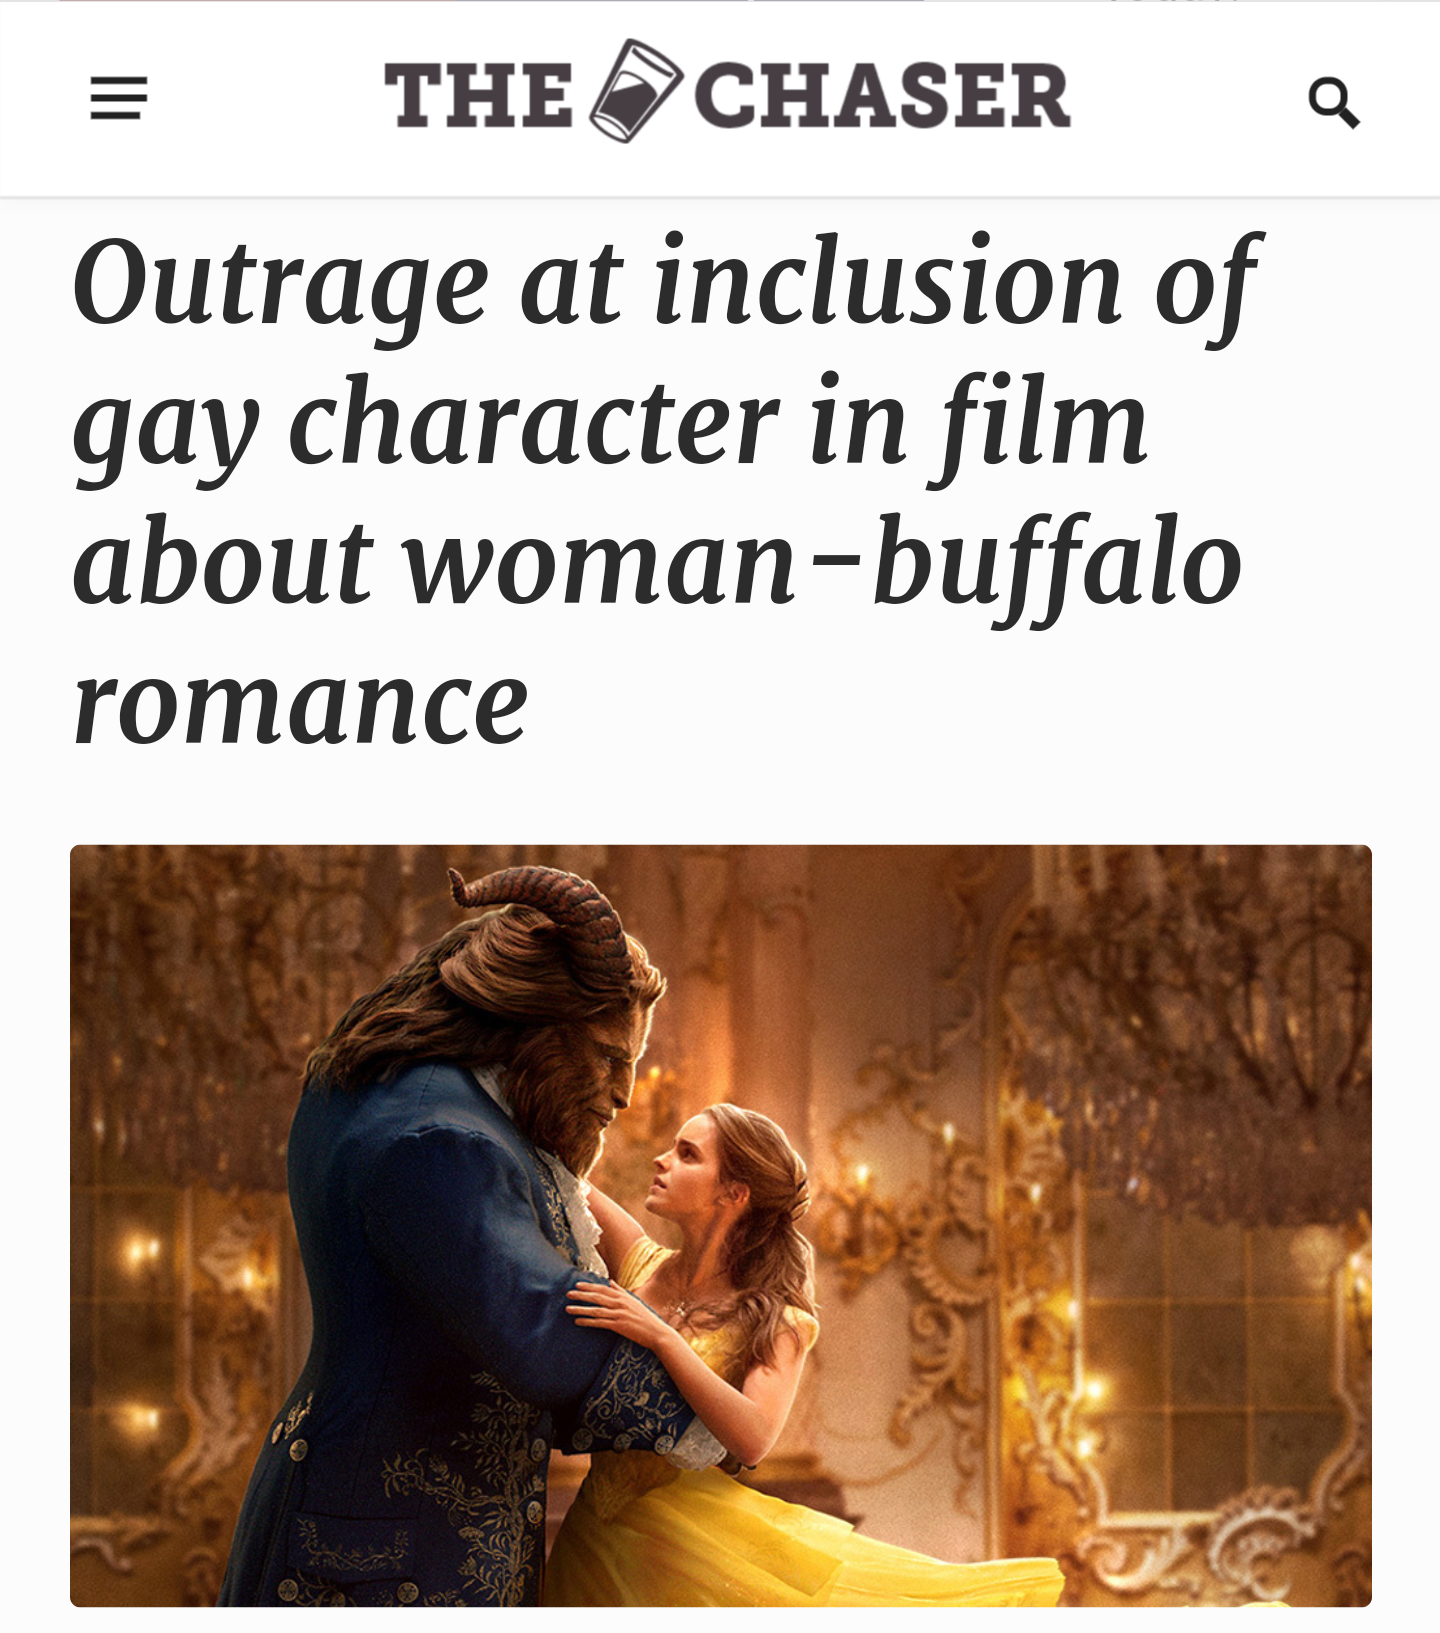 beauty and beast meme - The Chaser a Outrage at inclusion of gay character in film about womanbuffalo romance